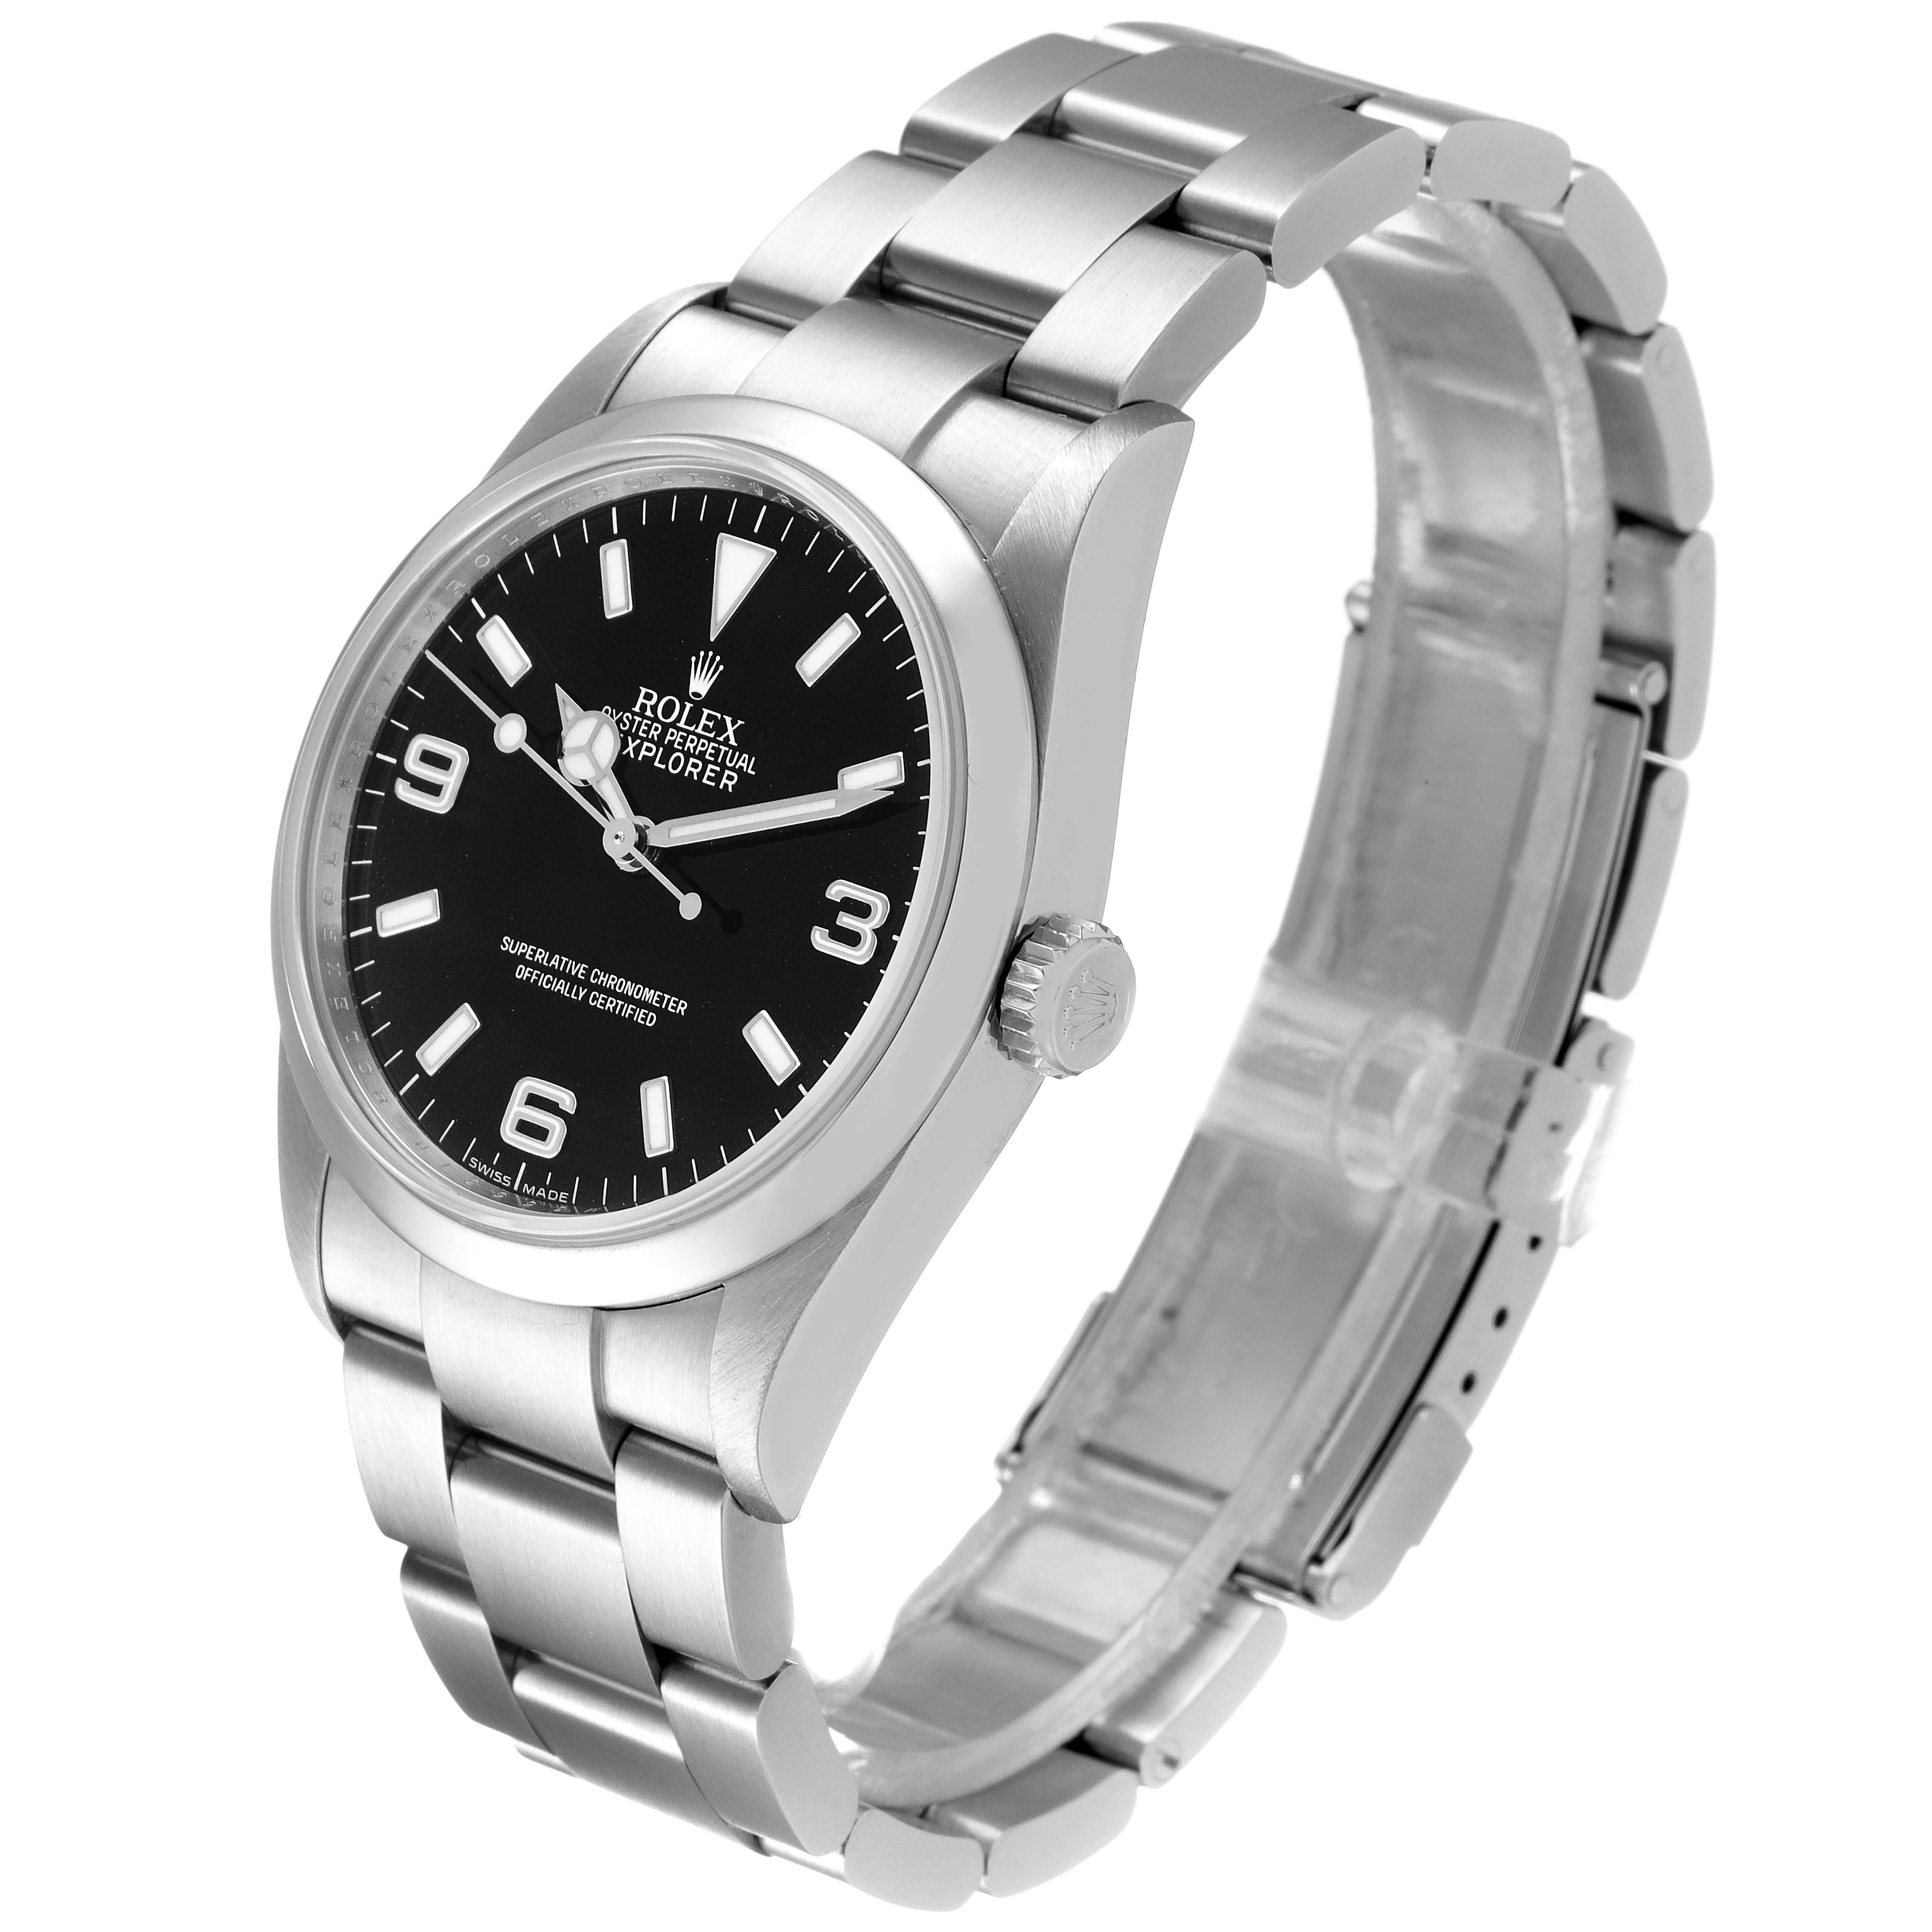 Rolex Explorer I Black Dial Stainless Steel Mens Watch 114270 Box ...